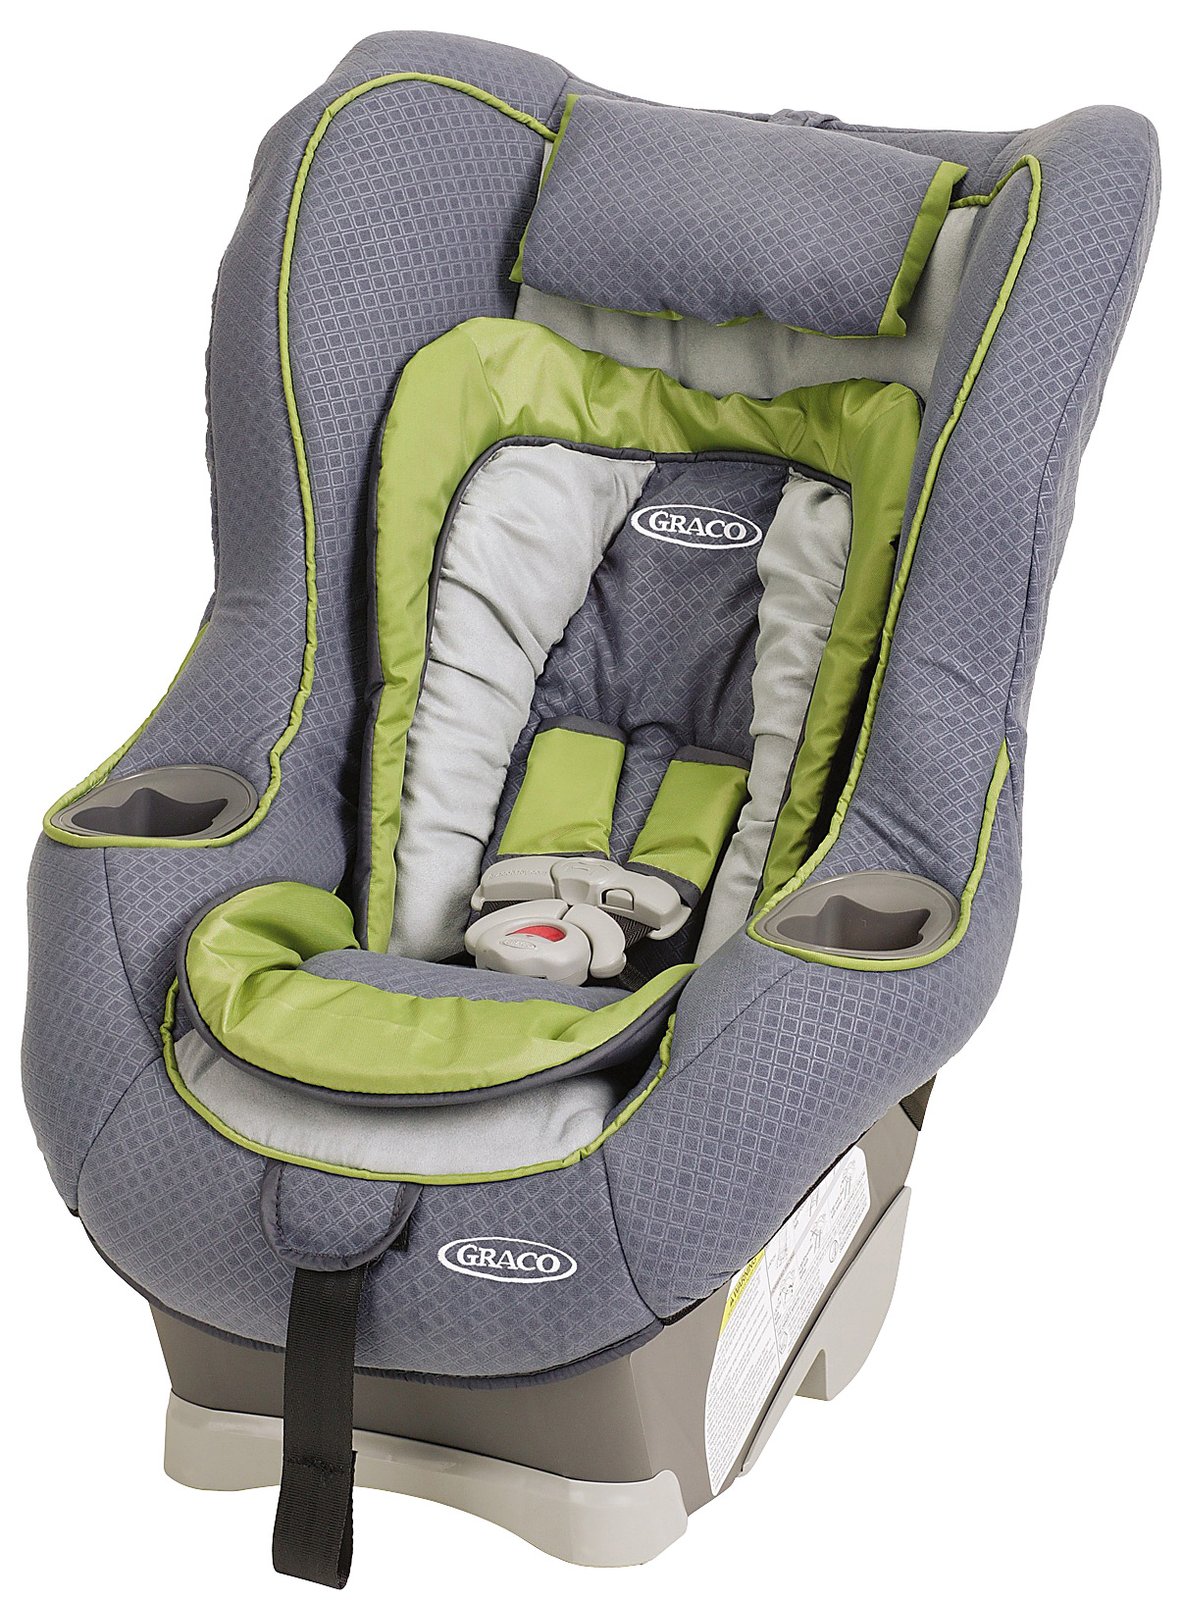 Graco Baby Seats for Kids